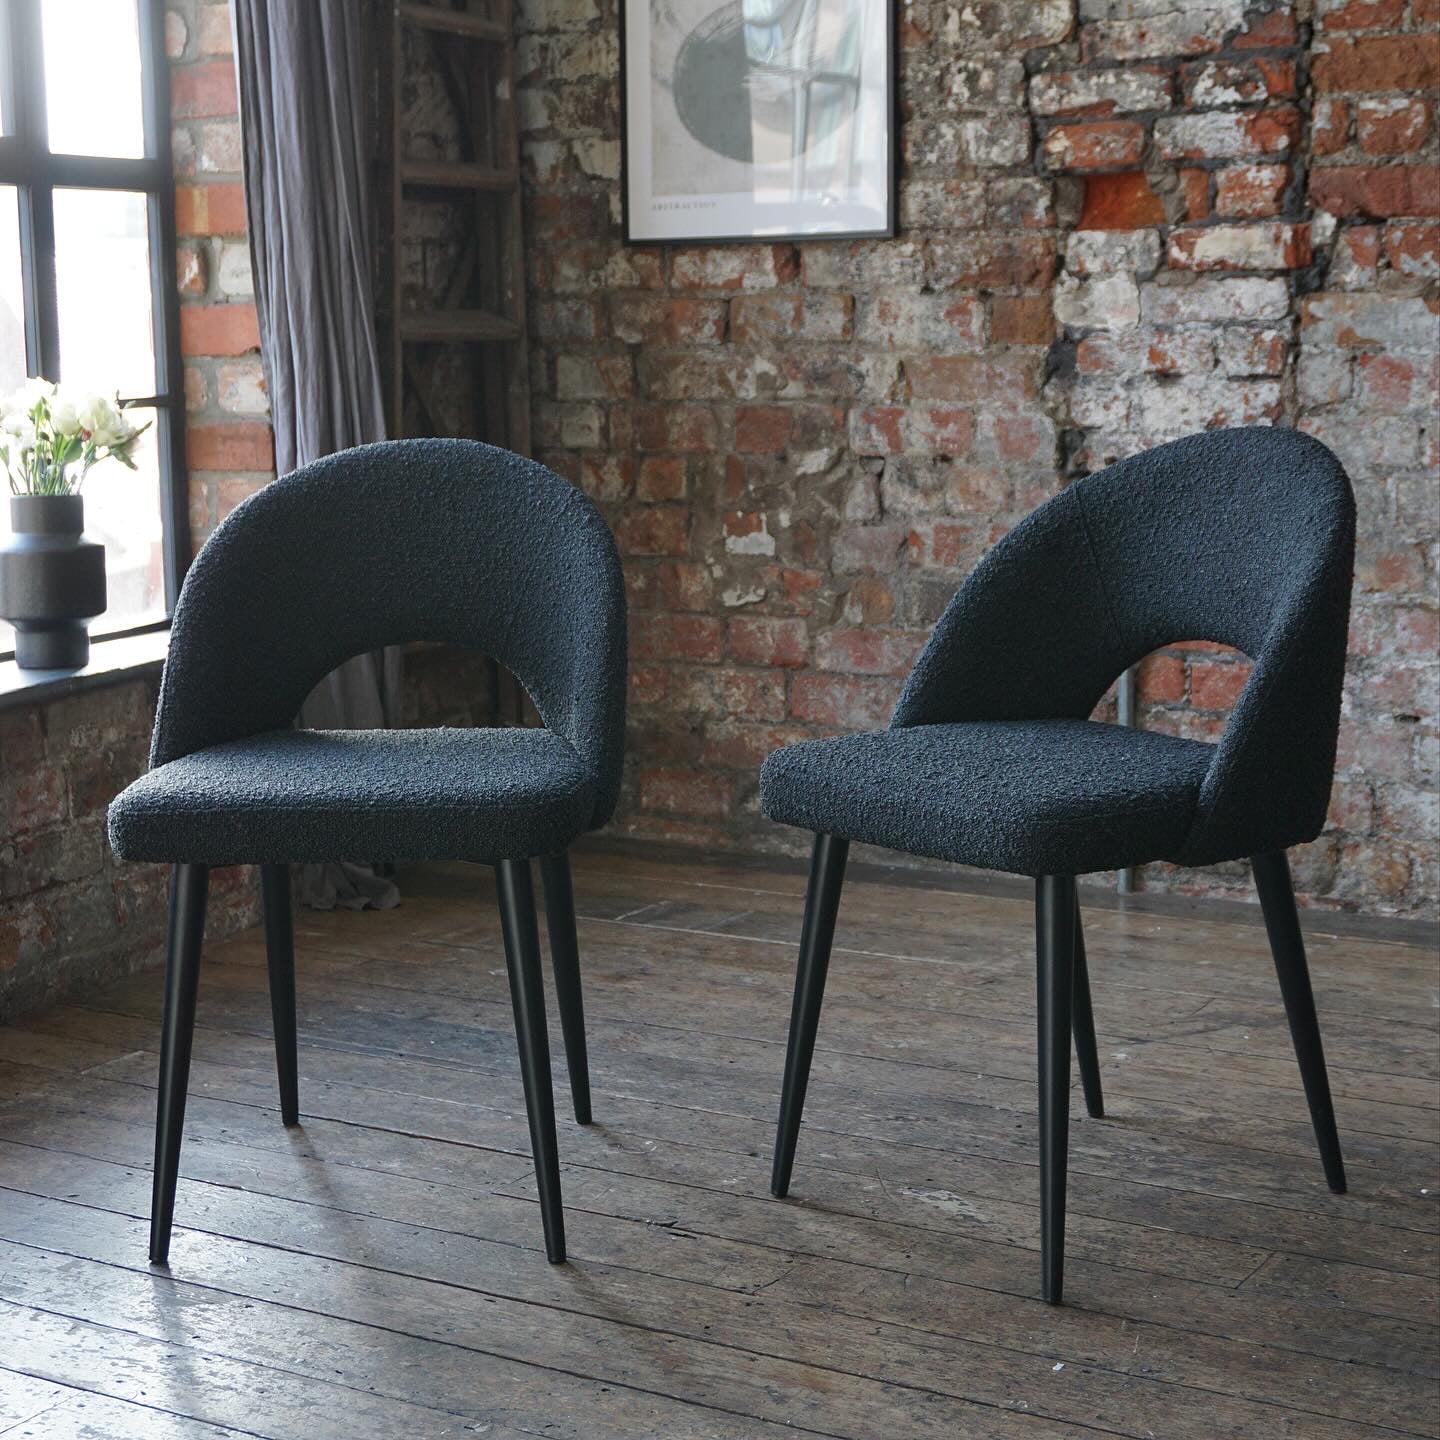 Bella Dining Chairs in Black Boucle (2pk)